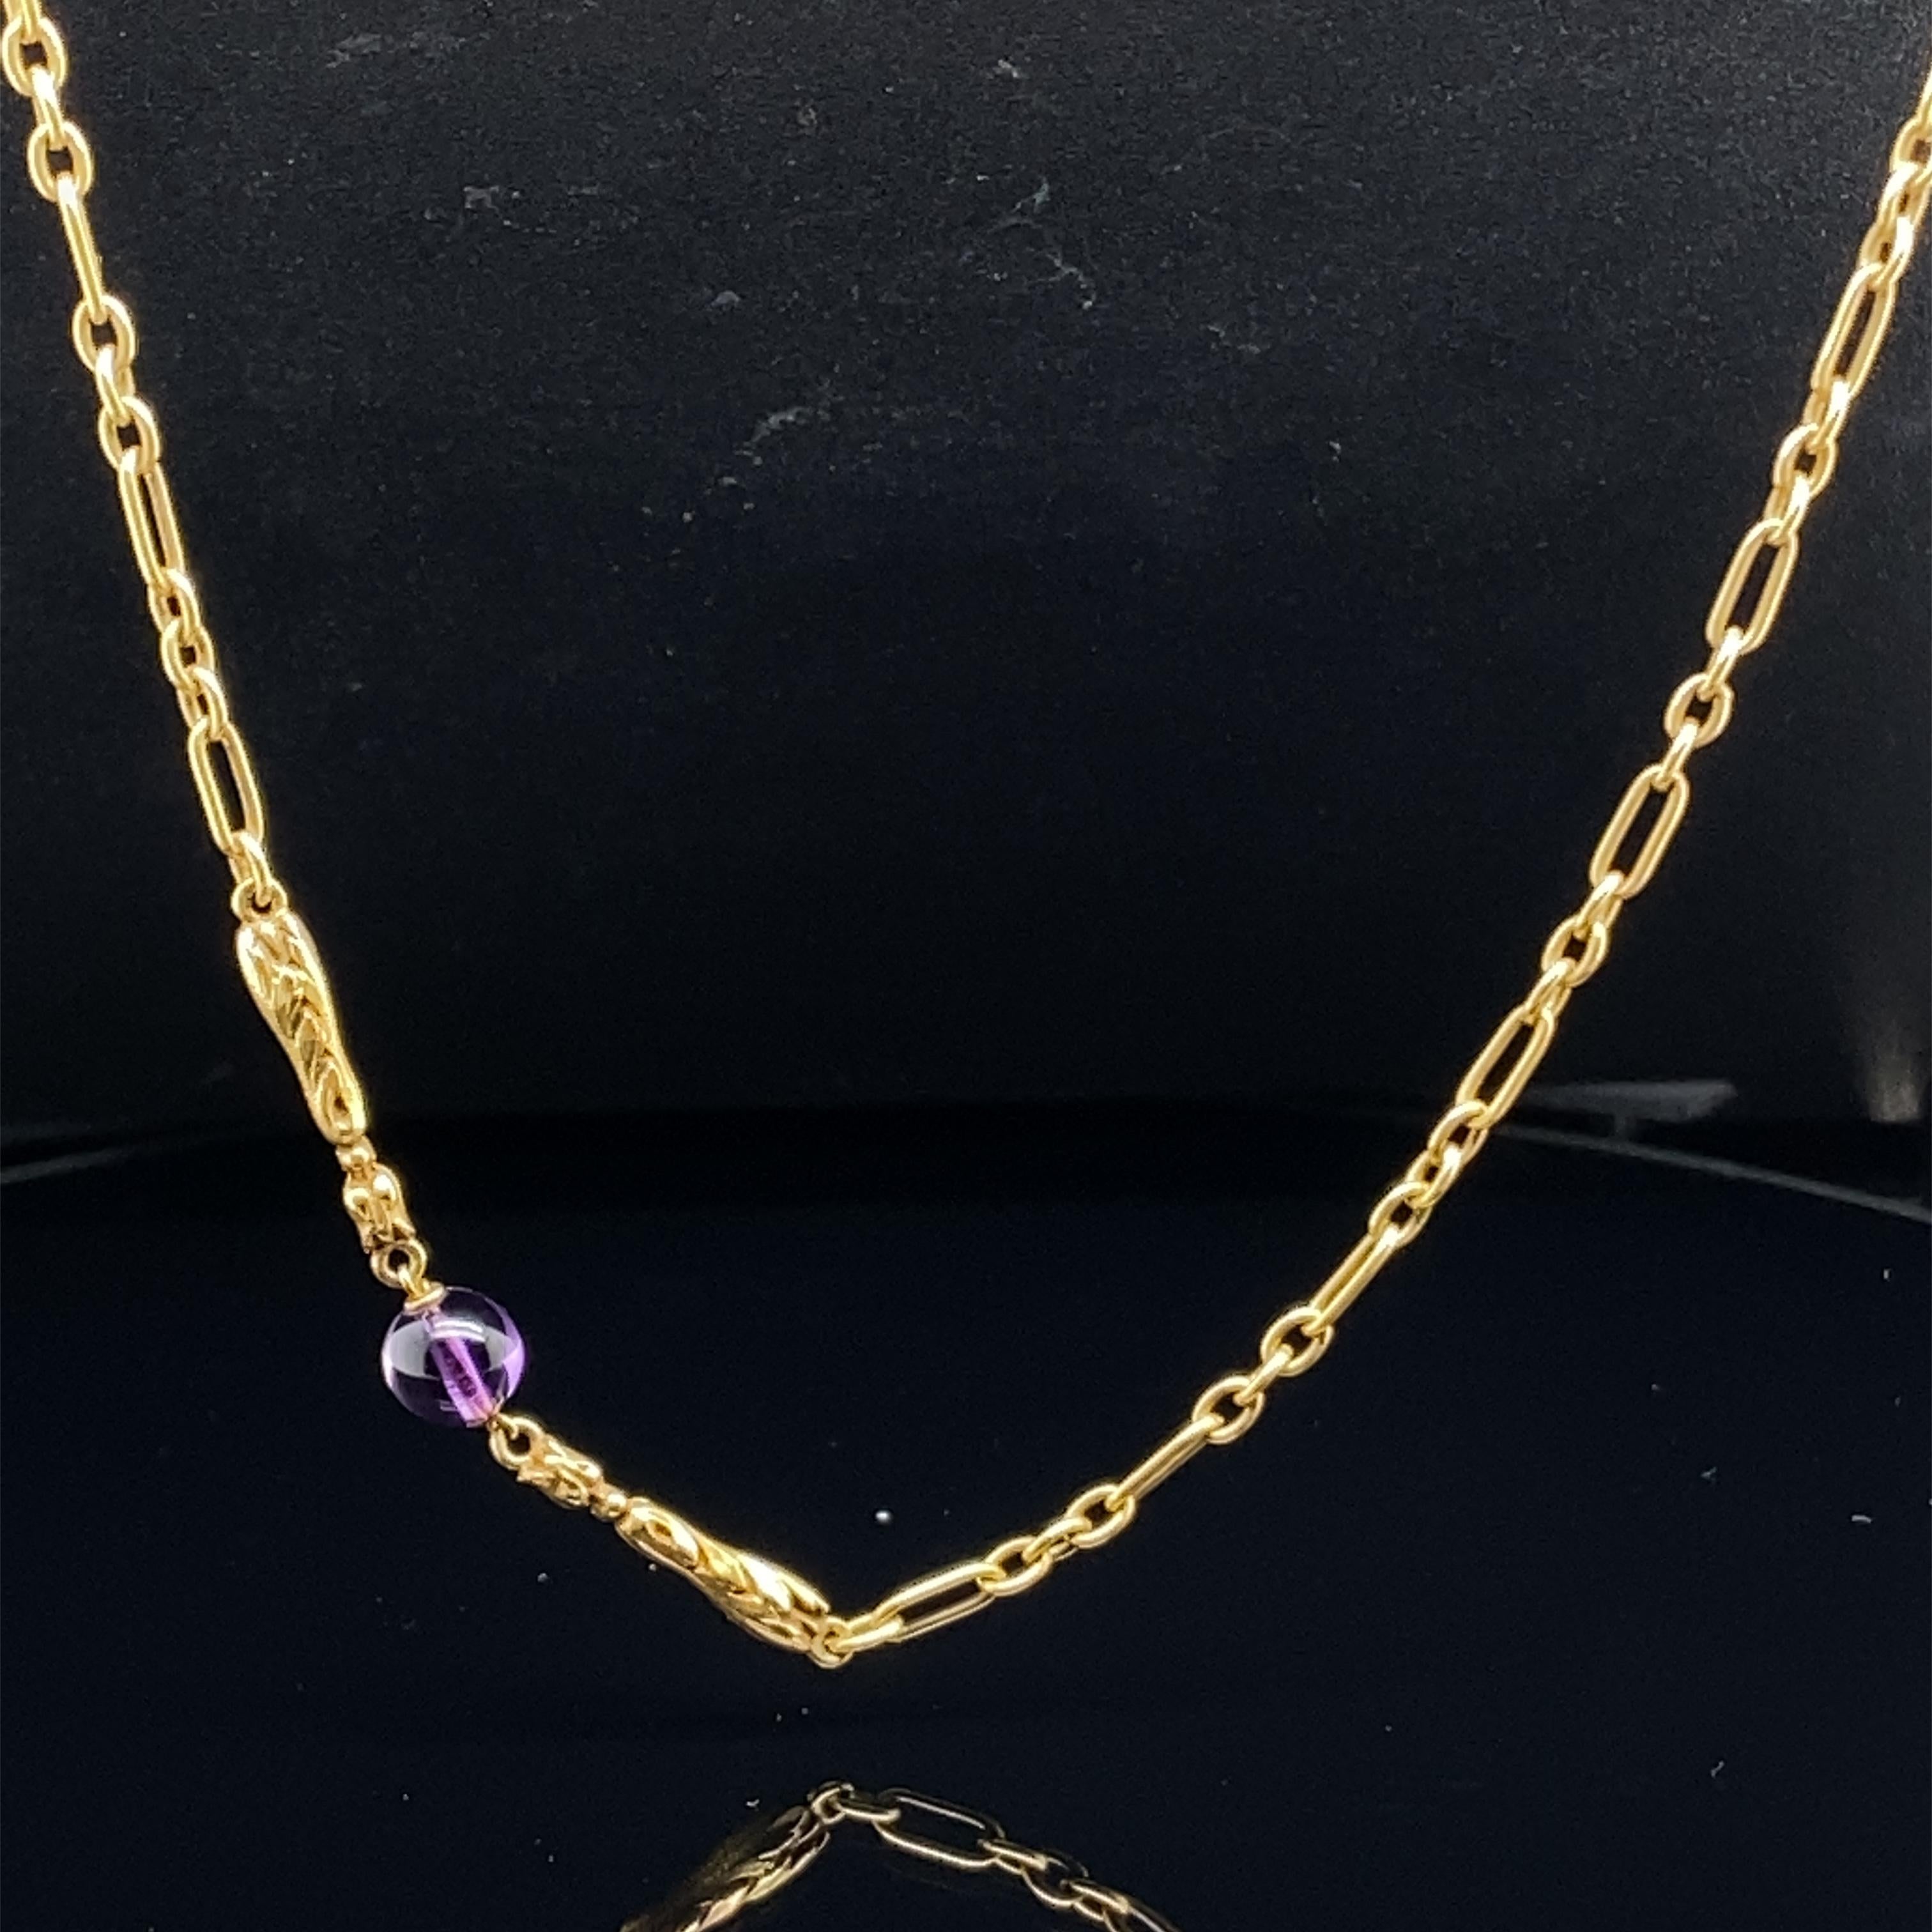 A Victorian 18 karat yellow gold amethyst longuard chain, circa 1900.

This 30 inch decorative antique longuard chain has been crafted in 18 karat yellow gold.

An excellent example of Victorian craftsmanship which consists of a long fine chain of